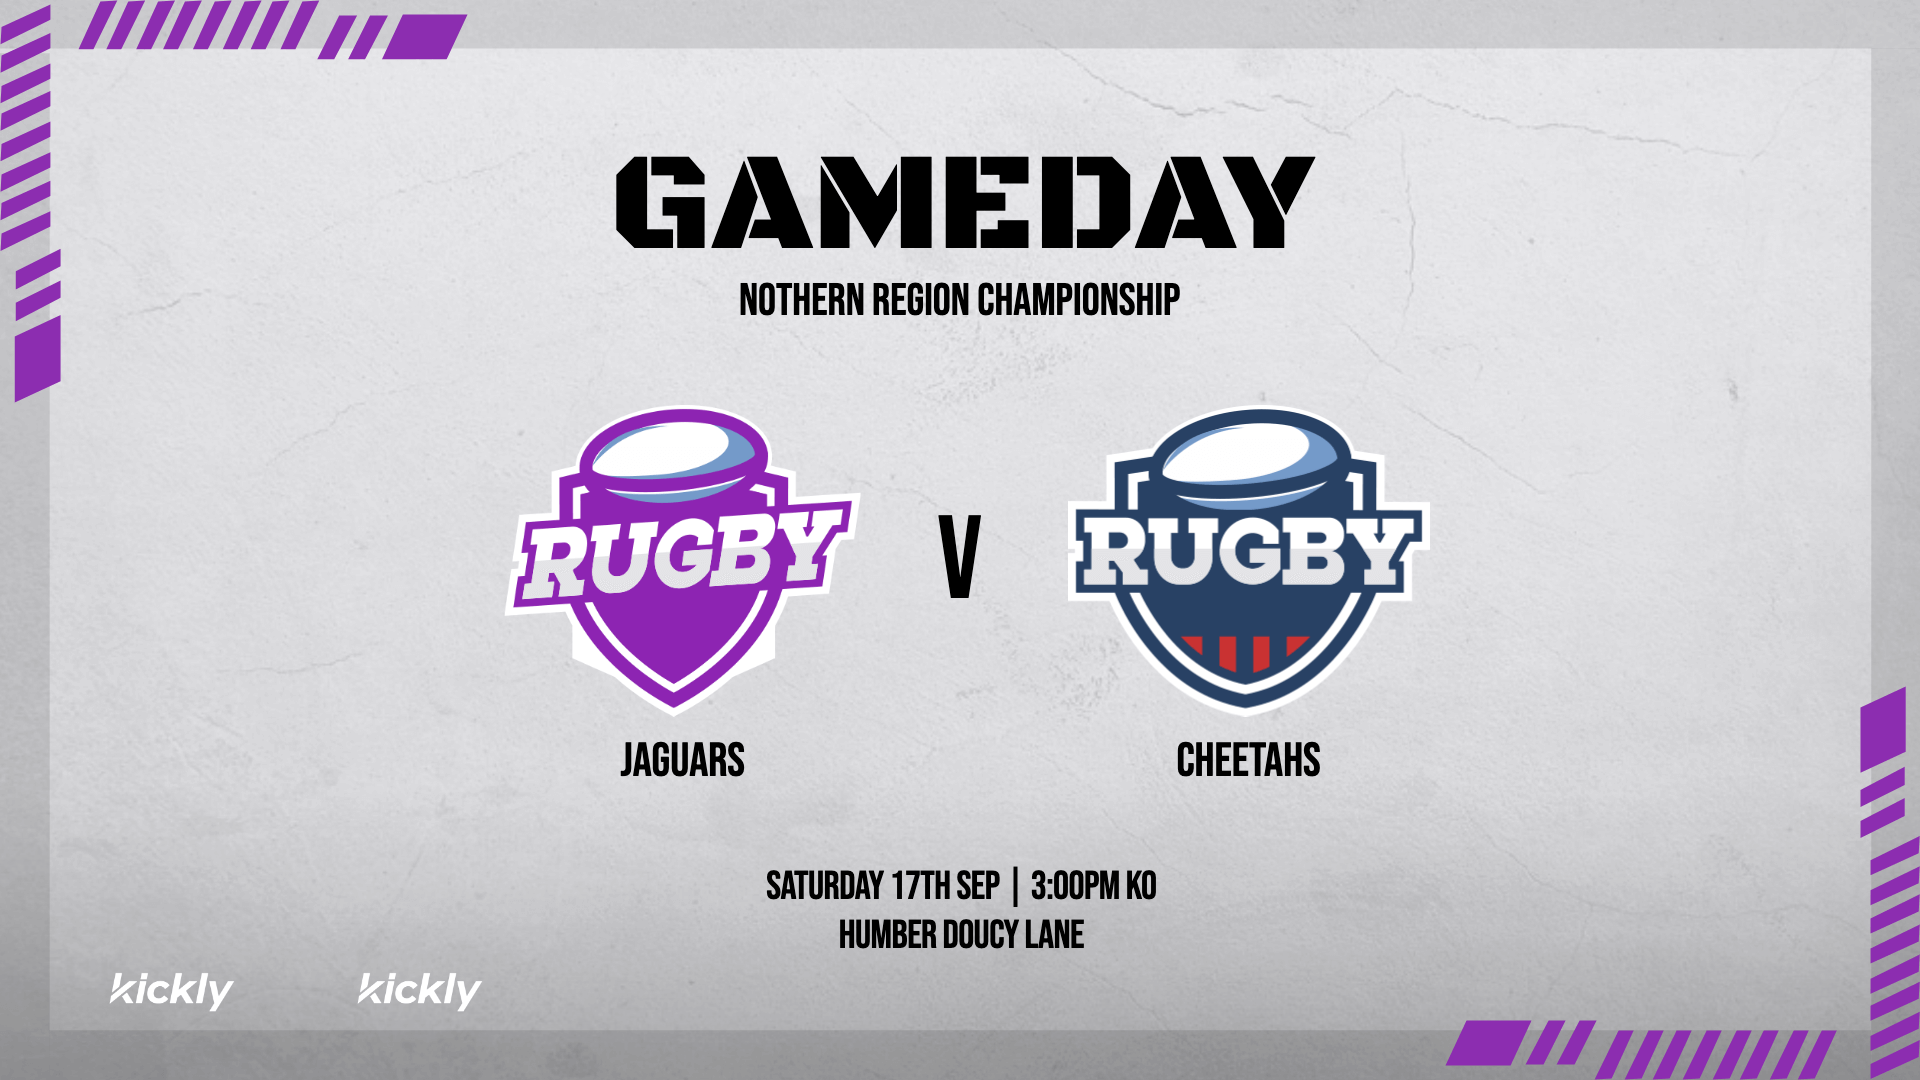 Rugby Gameday Announcement Design